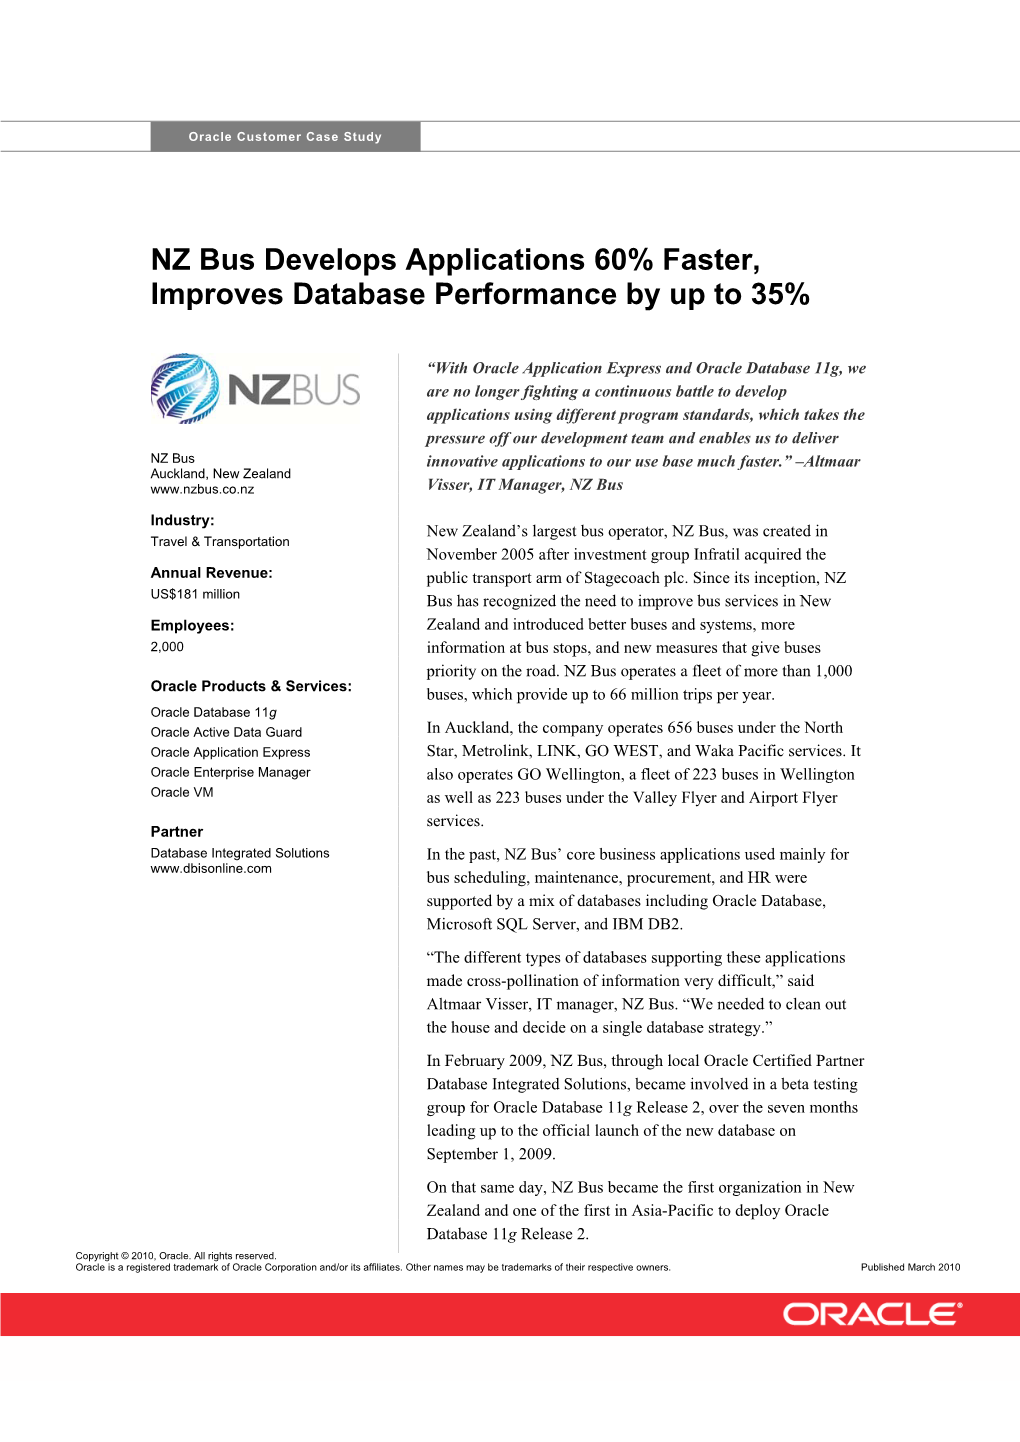 NZ Bus Develops Applications 60% Faster, Improves Database Performance by up to 35%